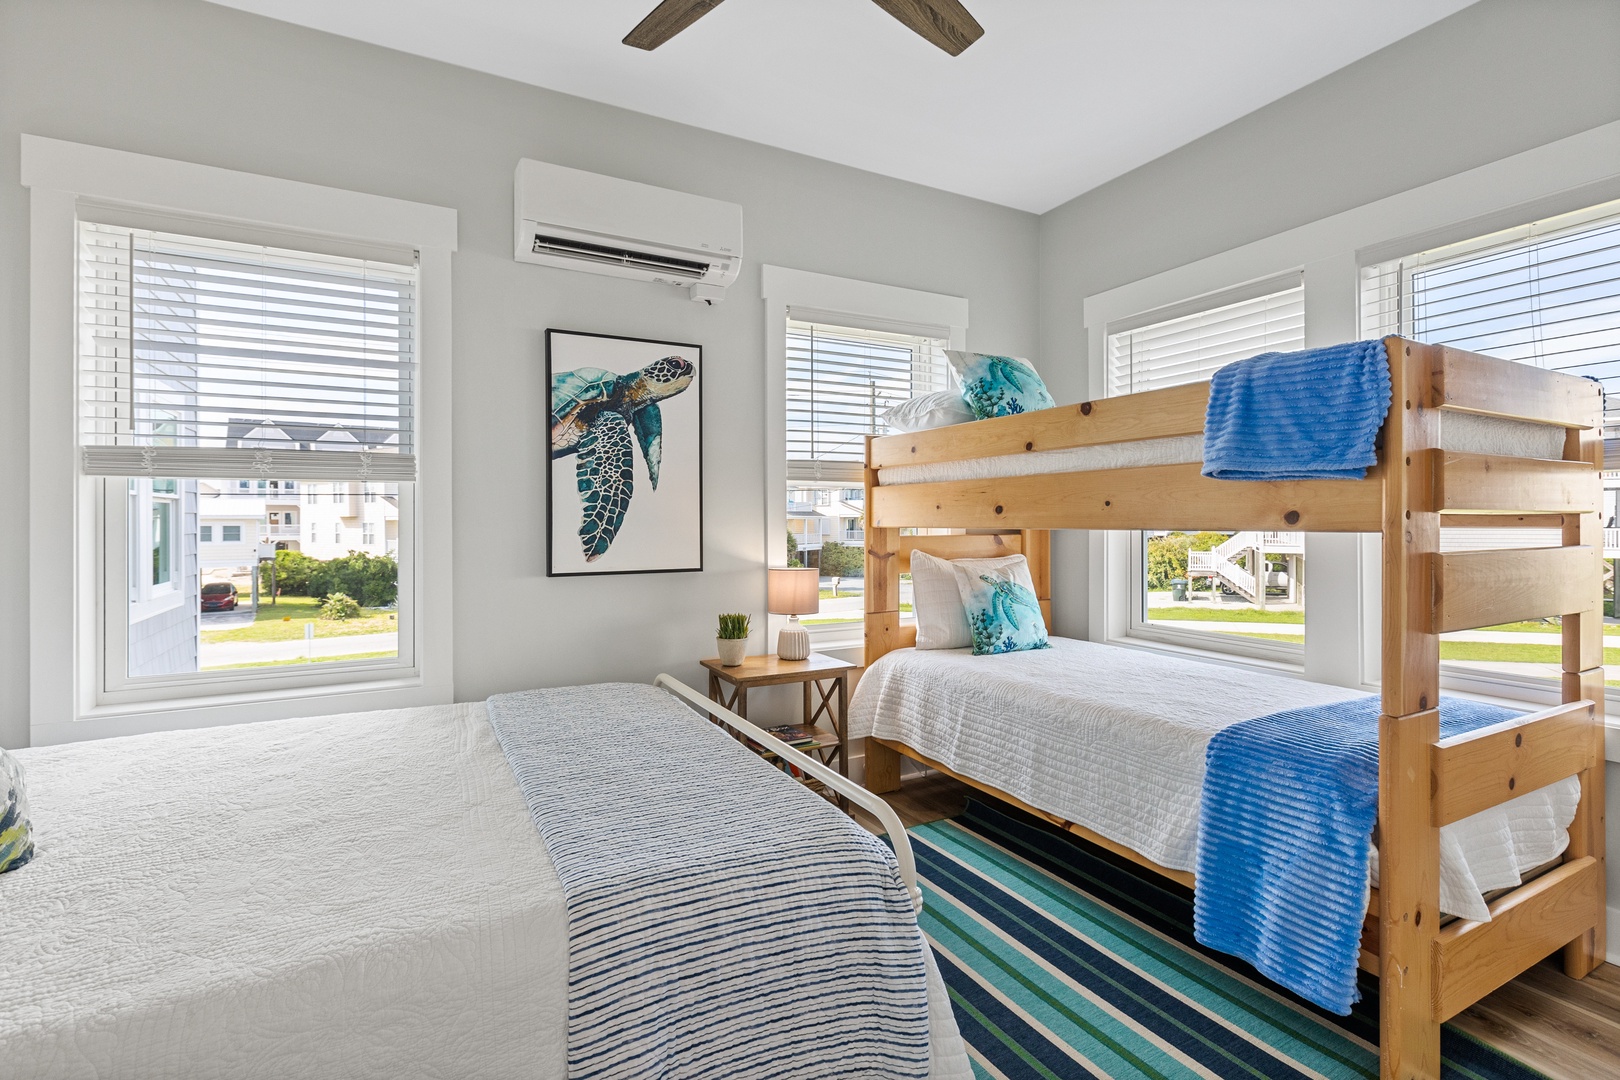 Bedroom 3 offers a full bed, a twin bunk bed, and a Smart TV